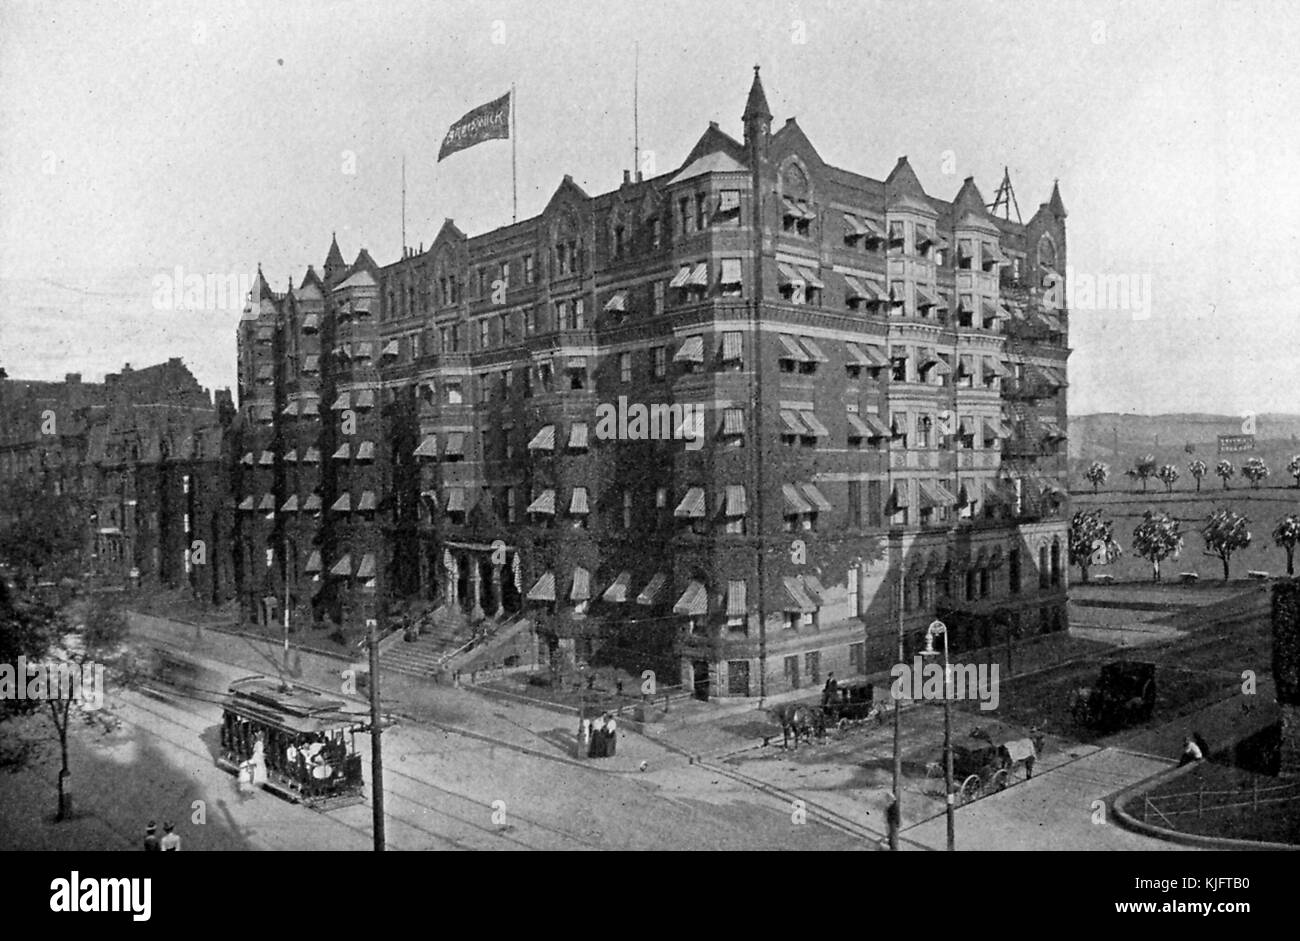 A exterior photograph of Hotel Brunswick, the hotel was well known for having United States Presidents, diplomats, world leaders, and celebrities stay there, people can be seen walking on the sidewalks, riding a trolley, and riding in horse drawn carriages around the hotel, the six story building was torn down in the 1950's, Boston, Massachusetts, 1913. Stock Photo